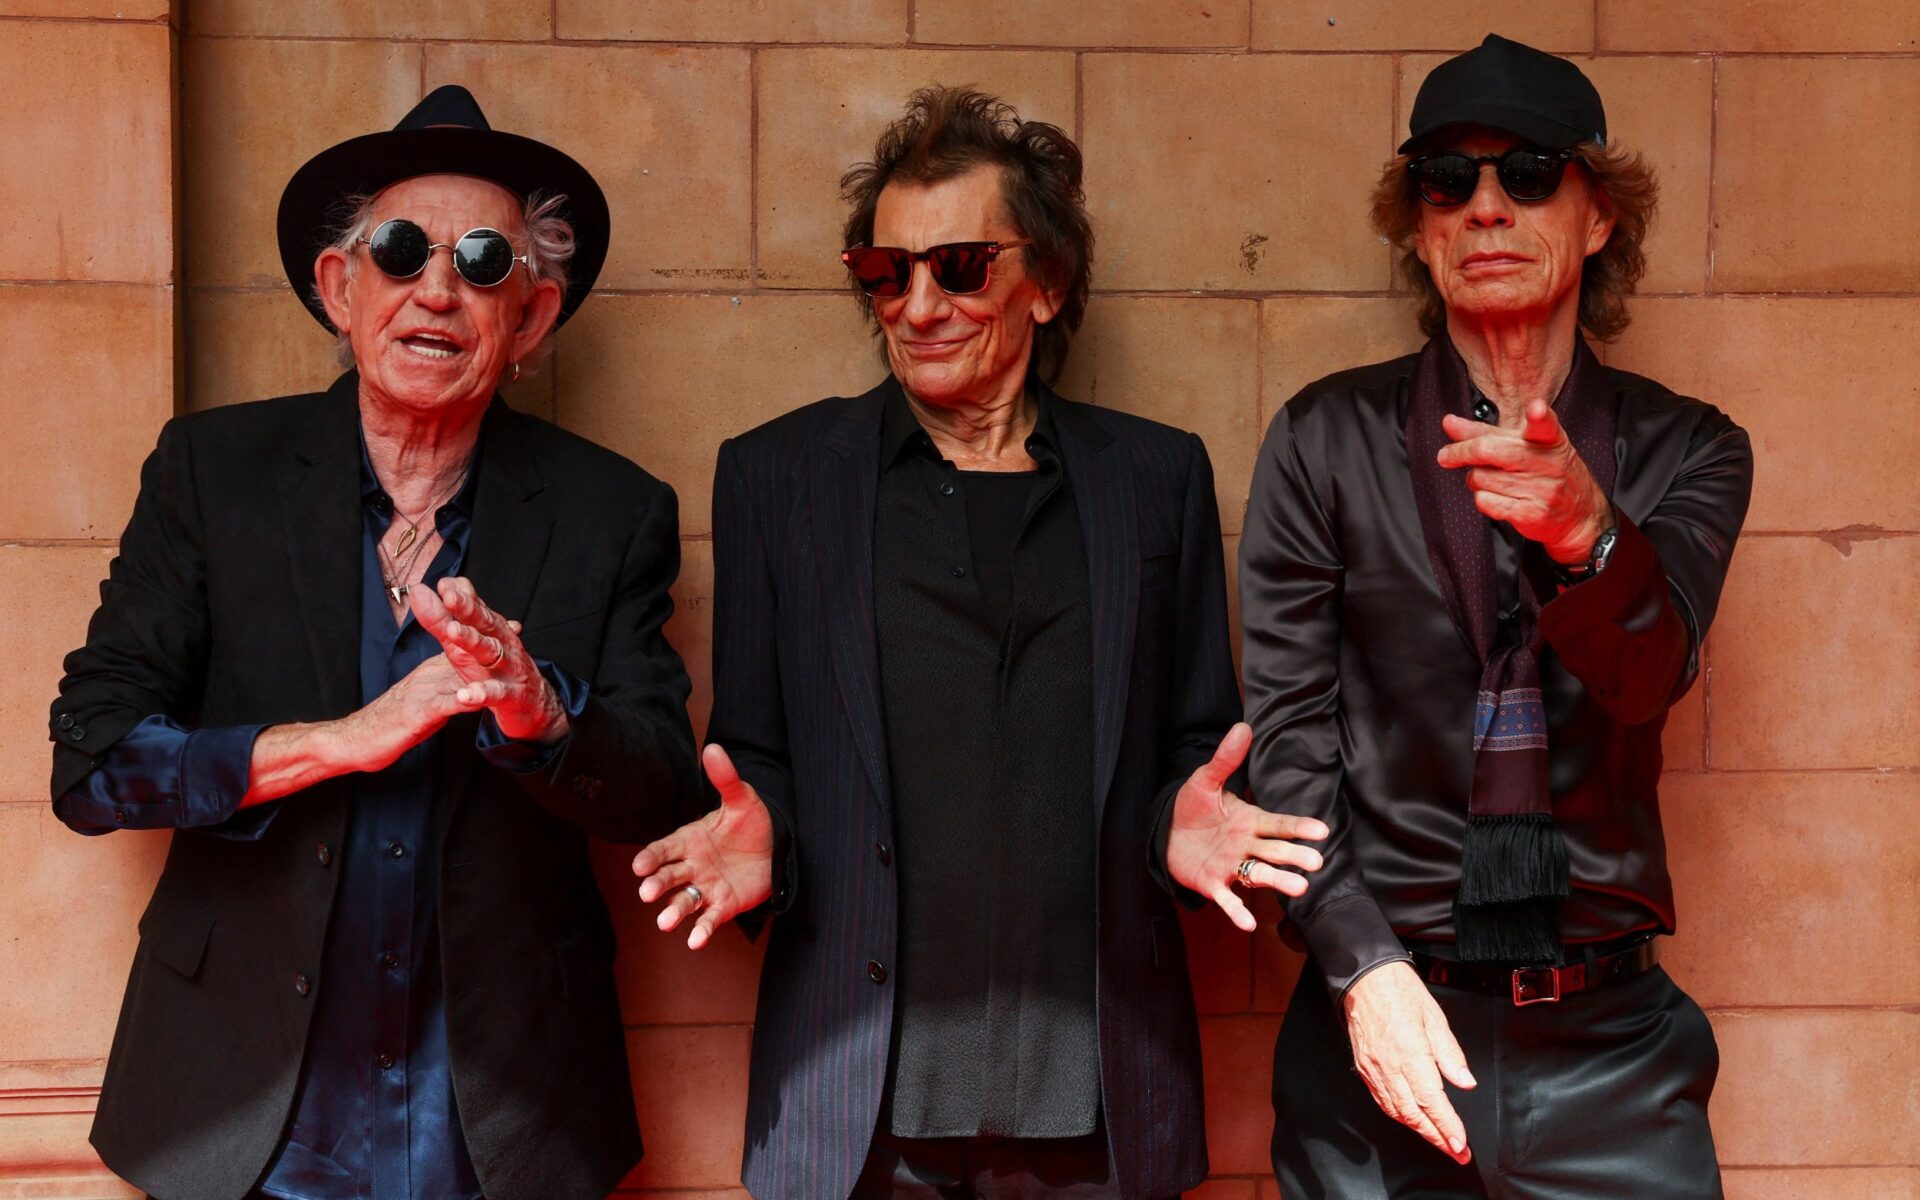 "The Rolling Stones Unleash Their Fierce Side with 'Angry' Single"